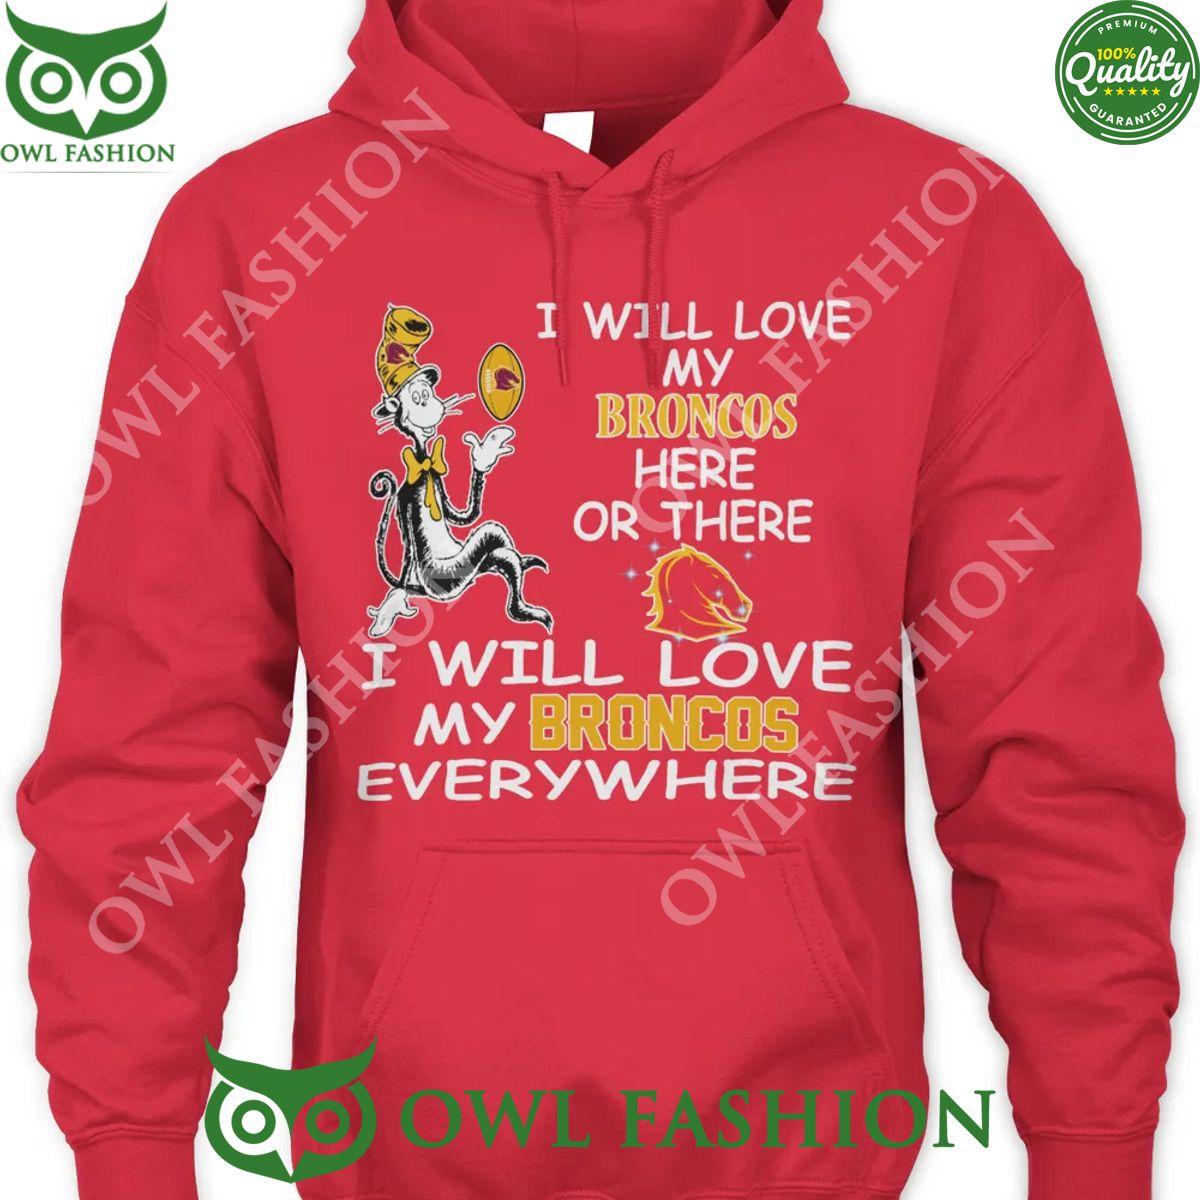 NRL I will love my Broncos here or there everywhere Brisbane Broncos t shirt